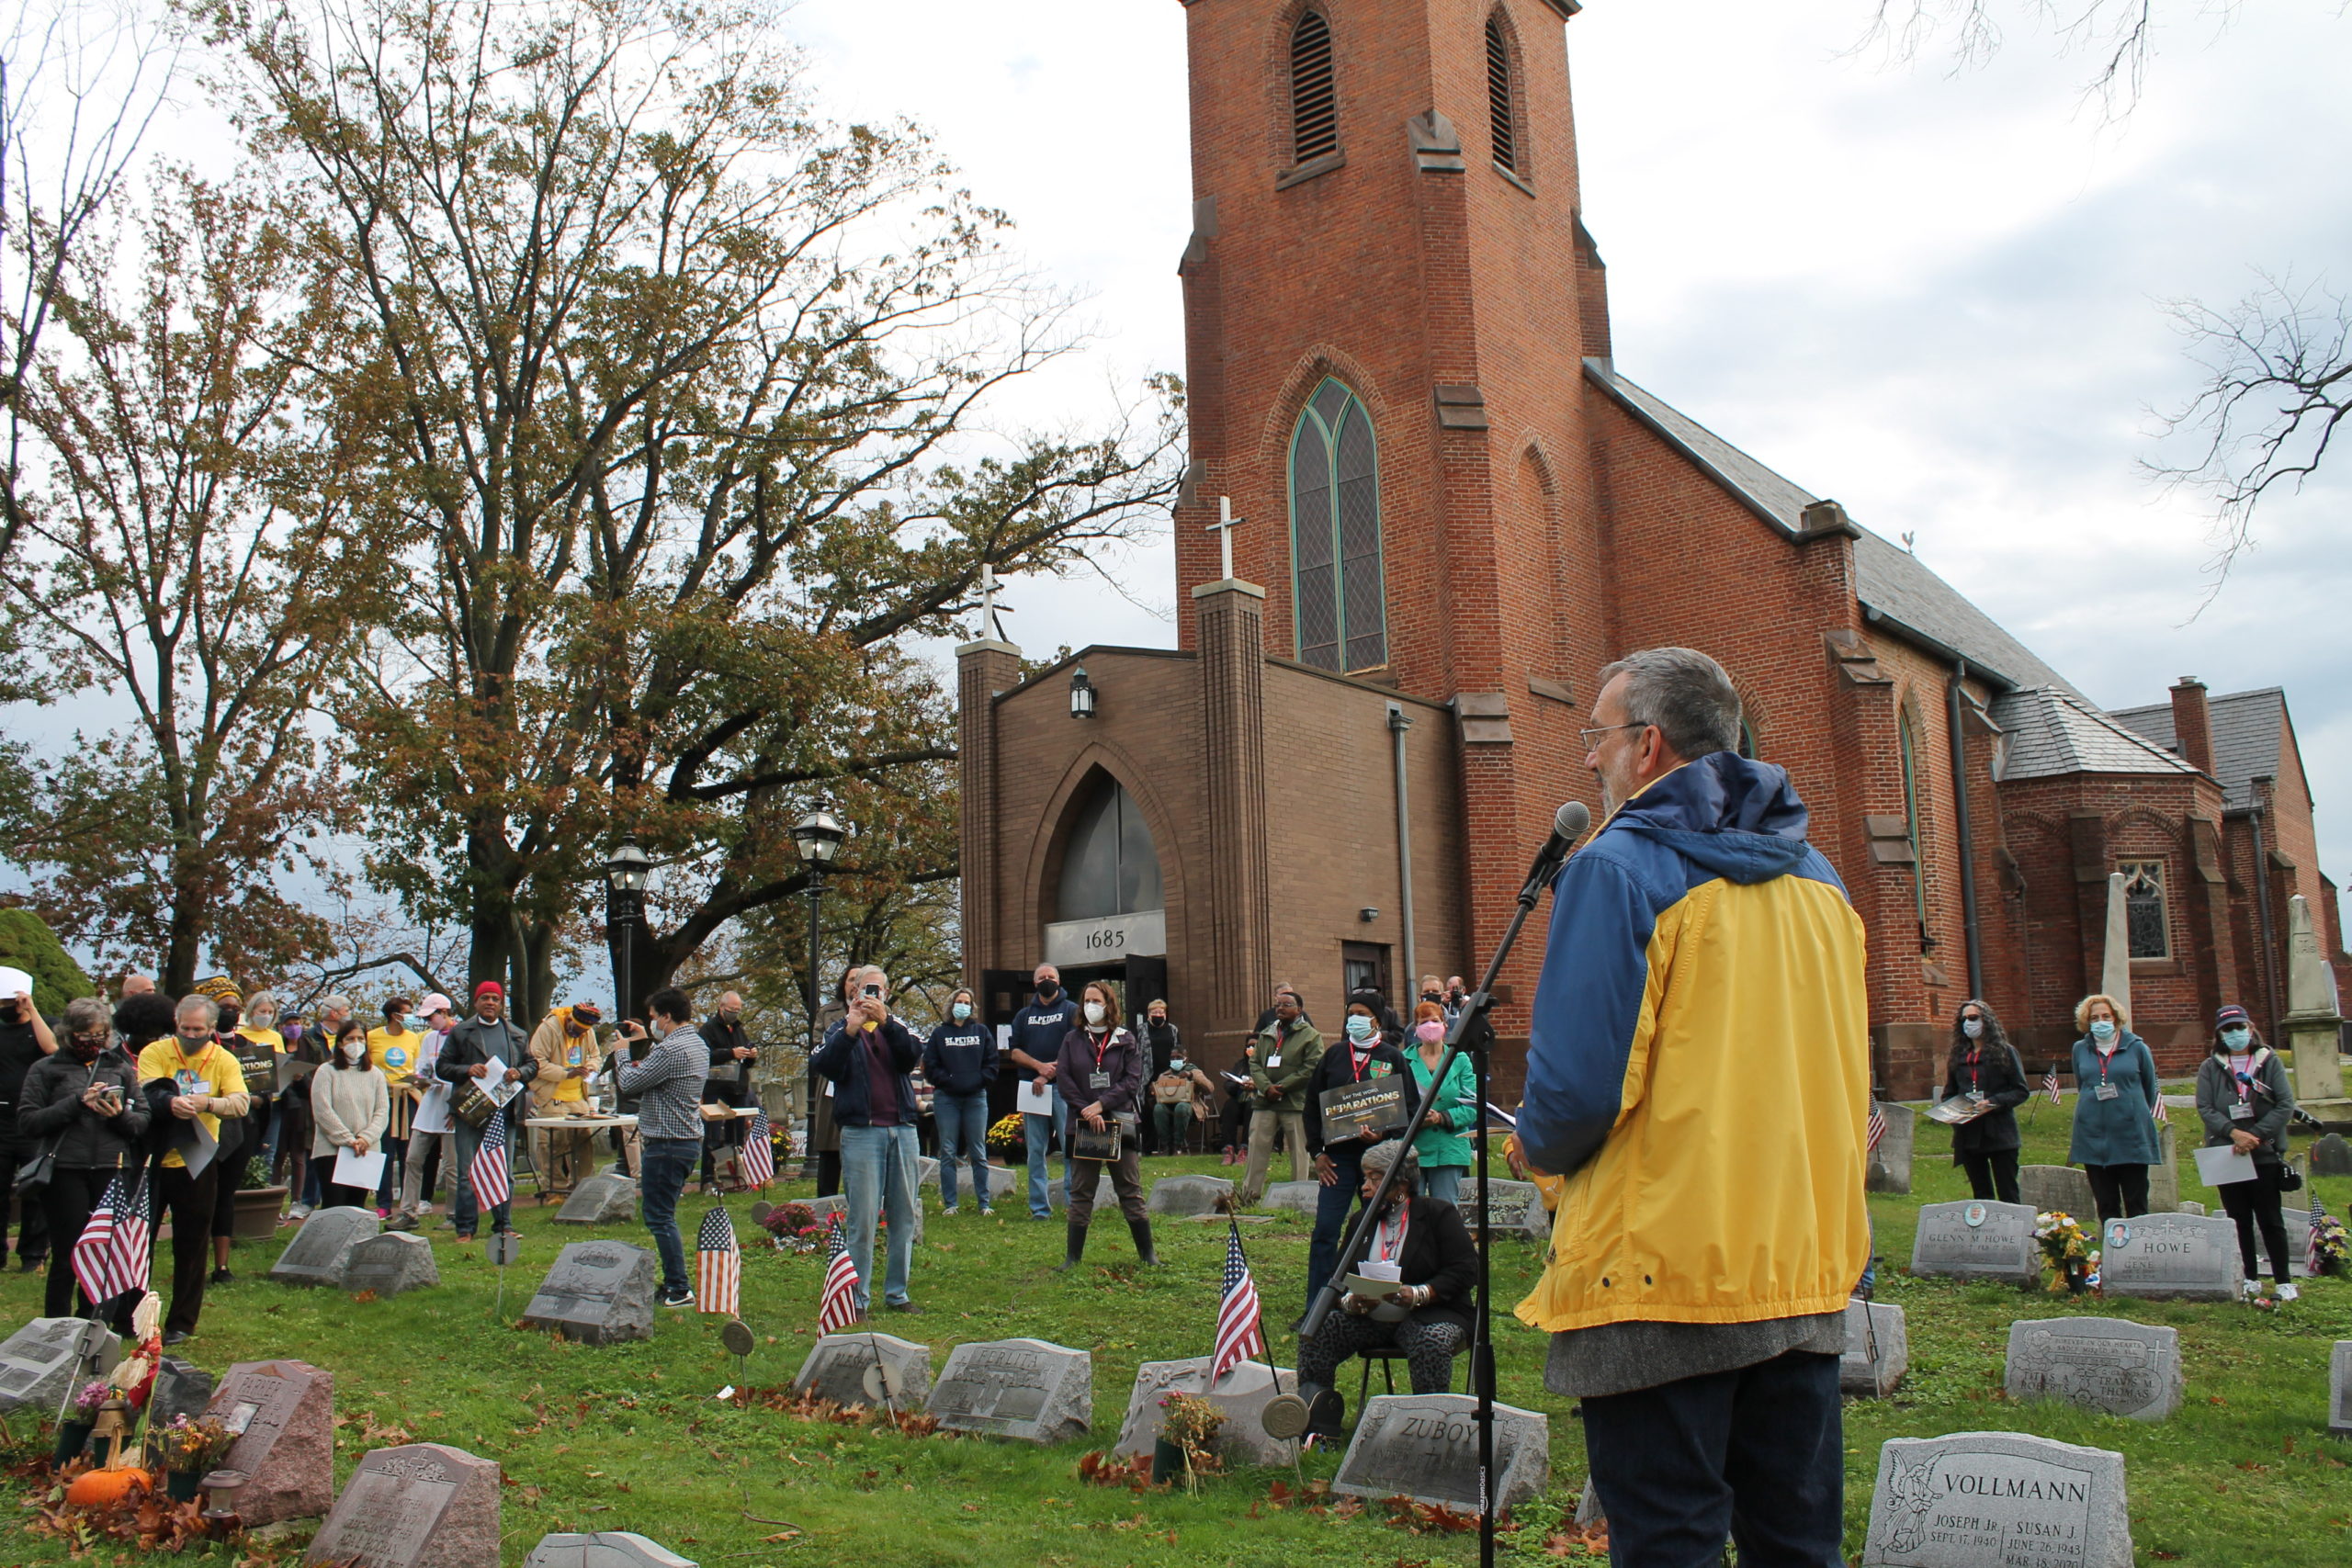 The Rev. Gregory Bezilla, Holy Trinity Episcopal Church, South River, addresses the crowd at the "Say the Word: Reparations" rally on Oct. 30, 2021 at St. Peter's Episcopal Church in Perth Amboy, NJ